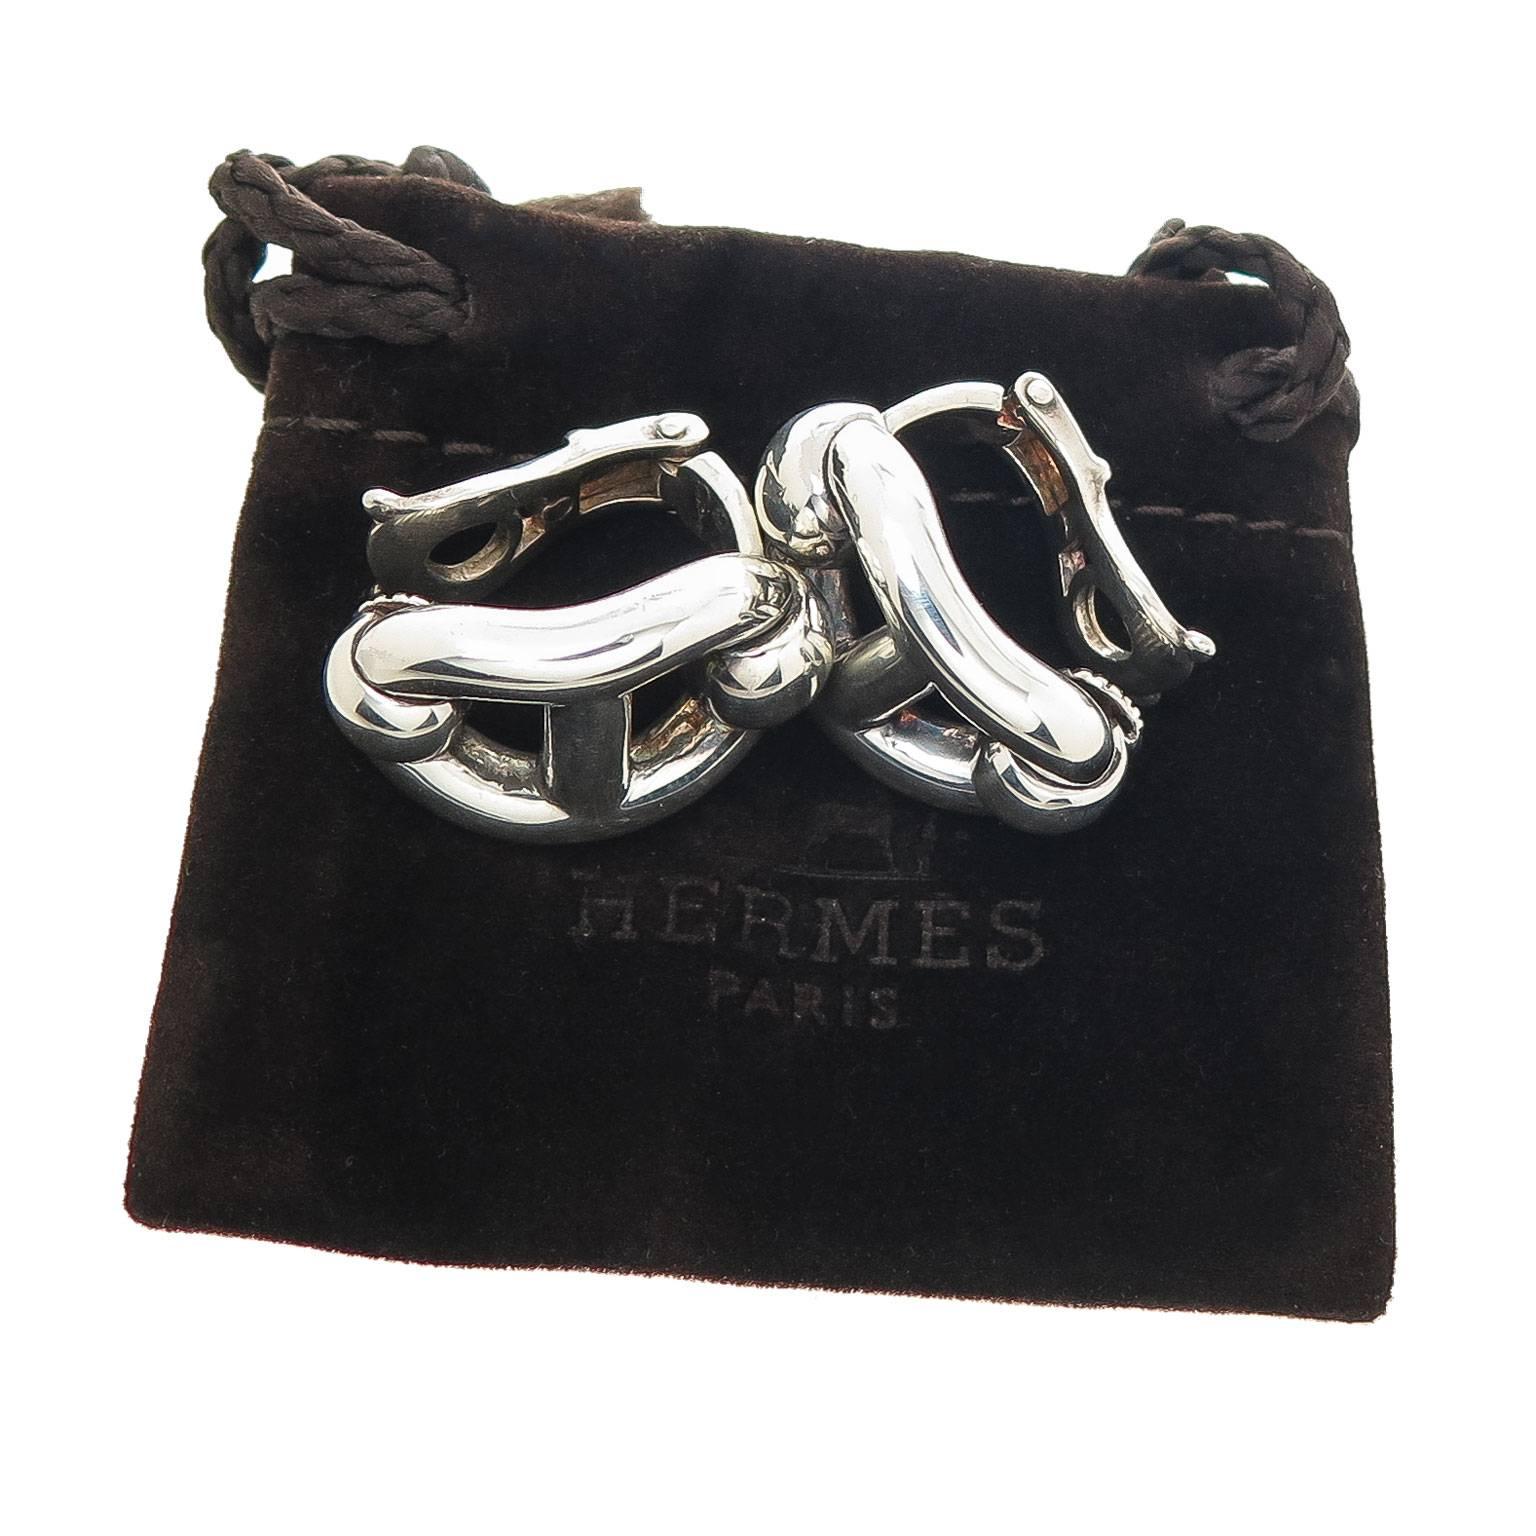 Circa 2005 Hermes Chaine D' Ancre Sterling Silver Earrings, measuring 7/8 inch in length and 1/2 inch wide. Having Clip backs to which a post can be easily added if desired. Comes in original Hermes travel pouch.